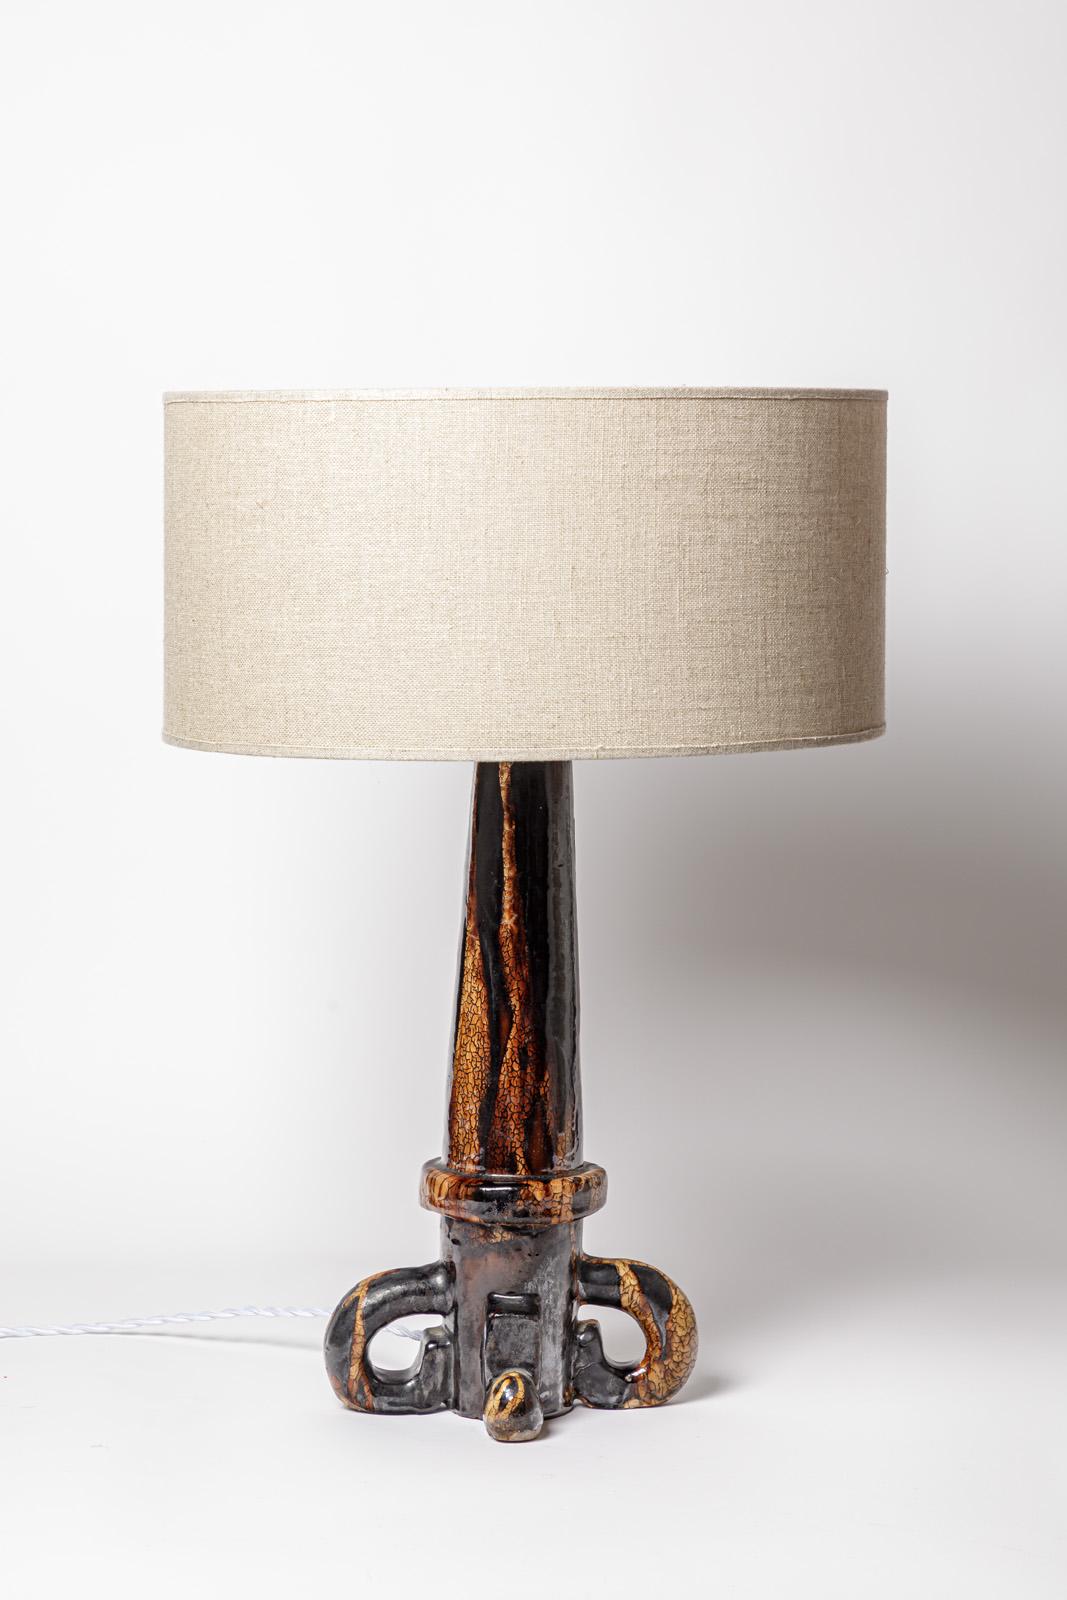 20th Century Large XXth Century White and Brown Ceramic Table Lamp Att. to Gio Colucci For Sale